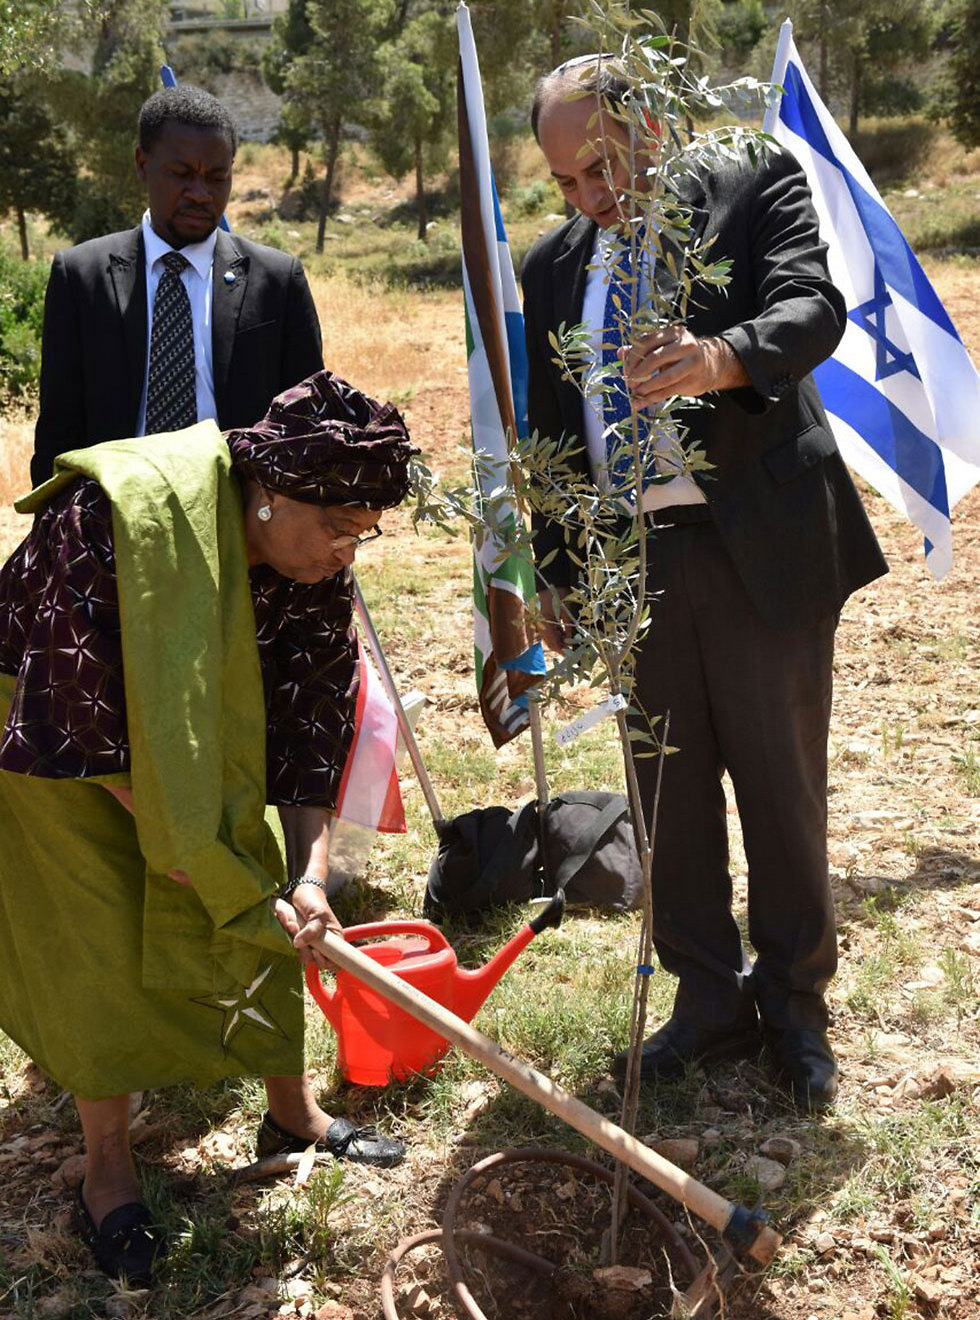 President Sirleaf planting perform the Zionist tradition of planting a tree in Israel (Photo: Shlomi Amsalem, Israeli Foreign Ministry)